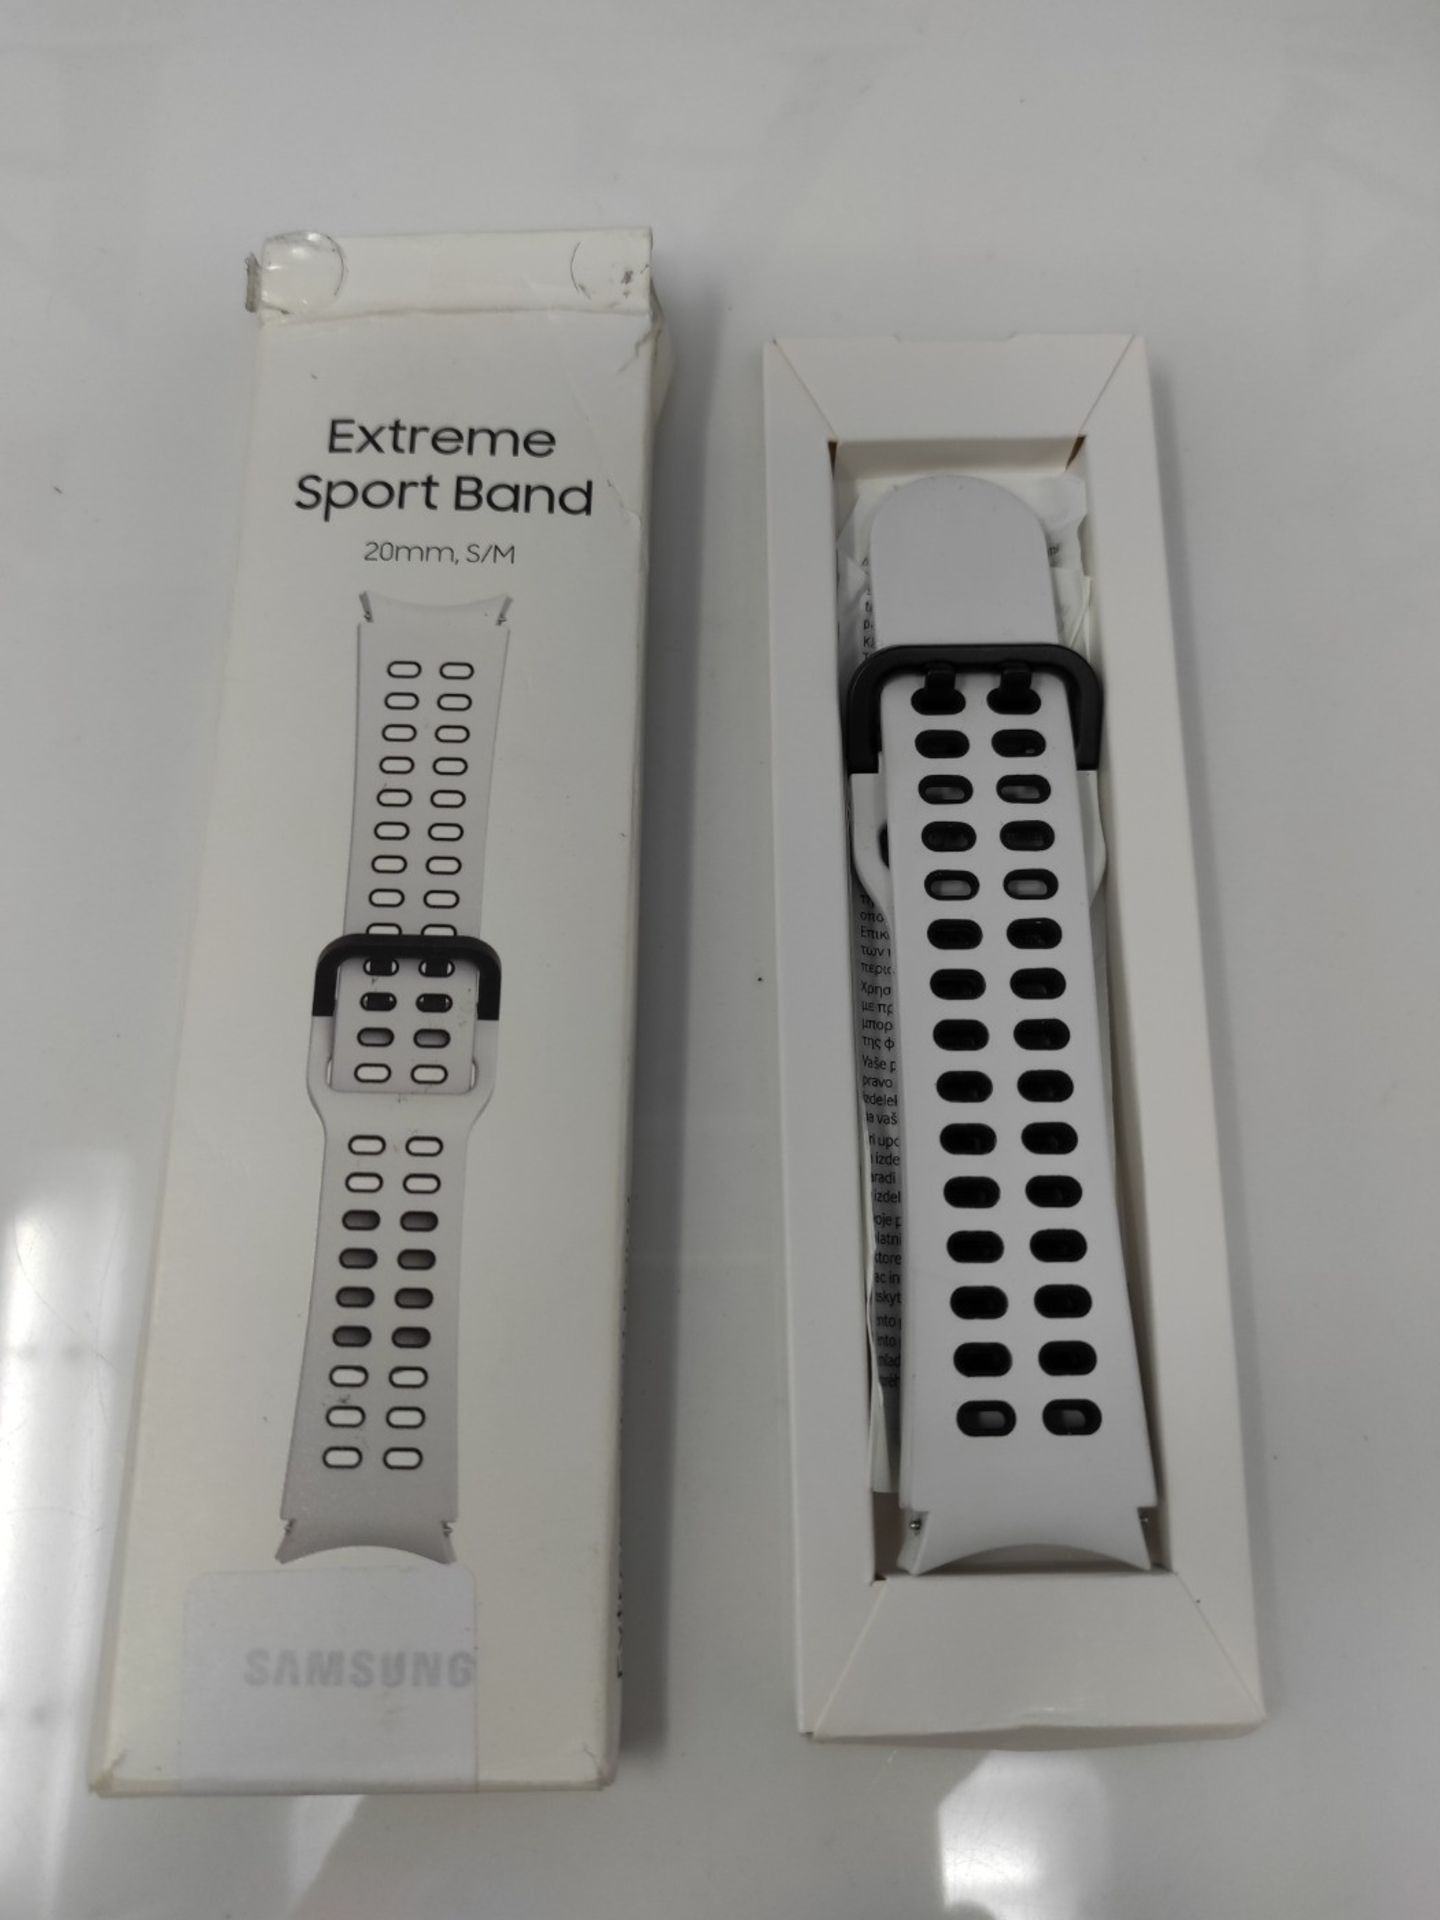 Samsung Extreme Sport Band 20mm S/M - White - Image 2 of 2